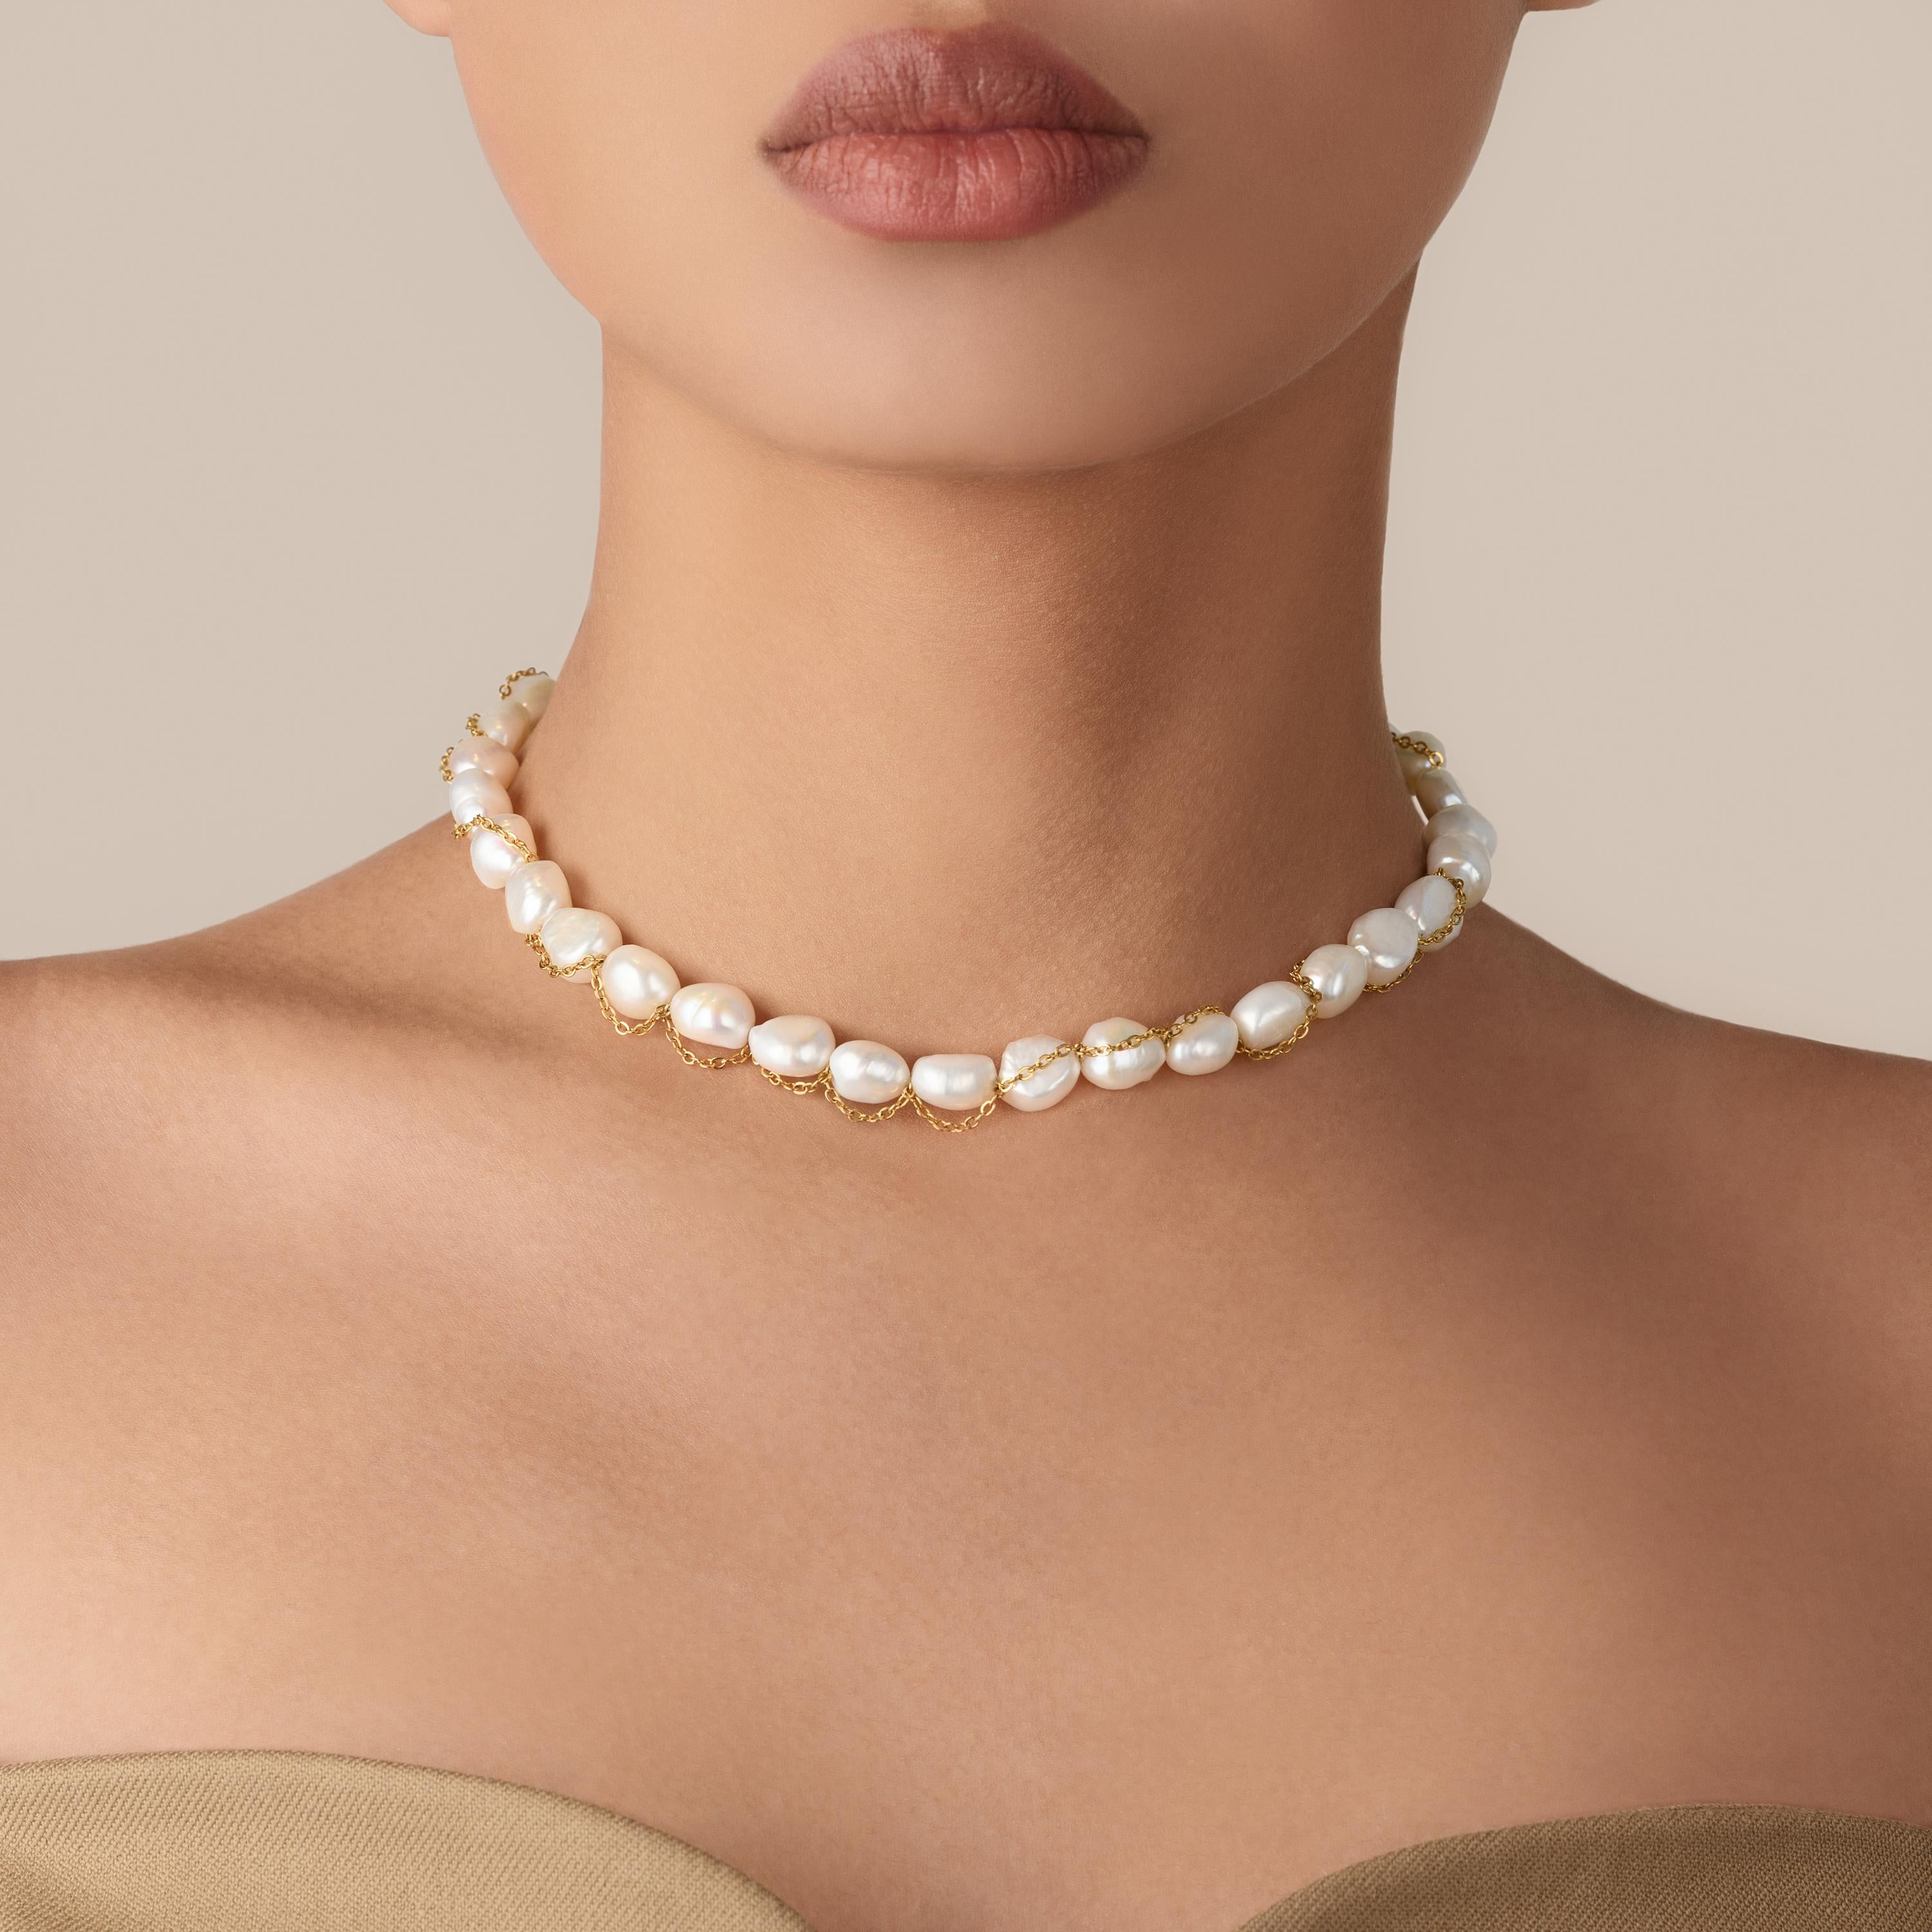 Indulge in the lavishness of our meticulously crafted White Baroque Pearl Necklace, a true embodiment of refined sophistication. This exquisite piece combines the allure of 10-11 mm baroque pearls with the opulence of an 18K gold-plated stainless